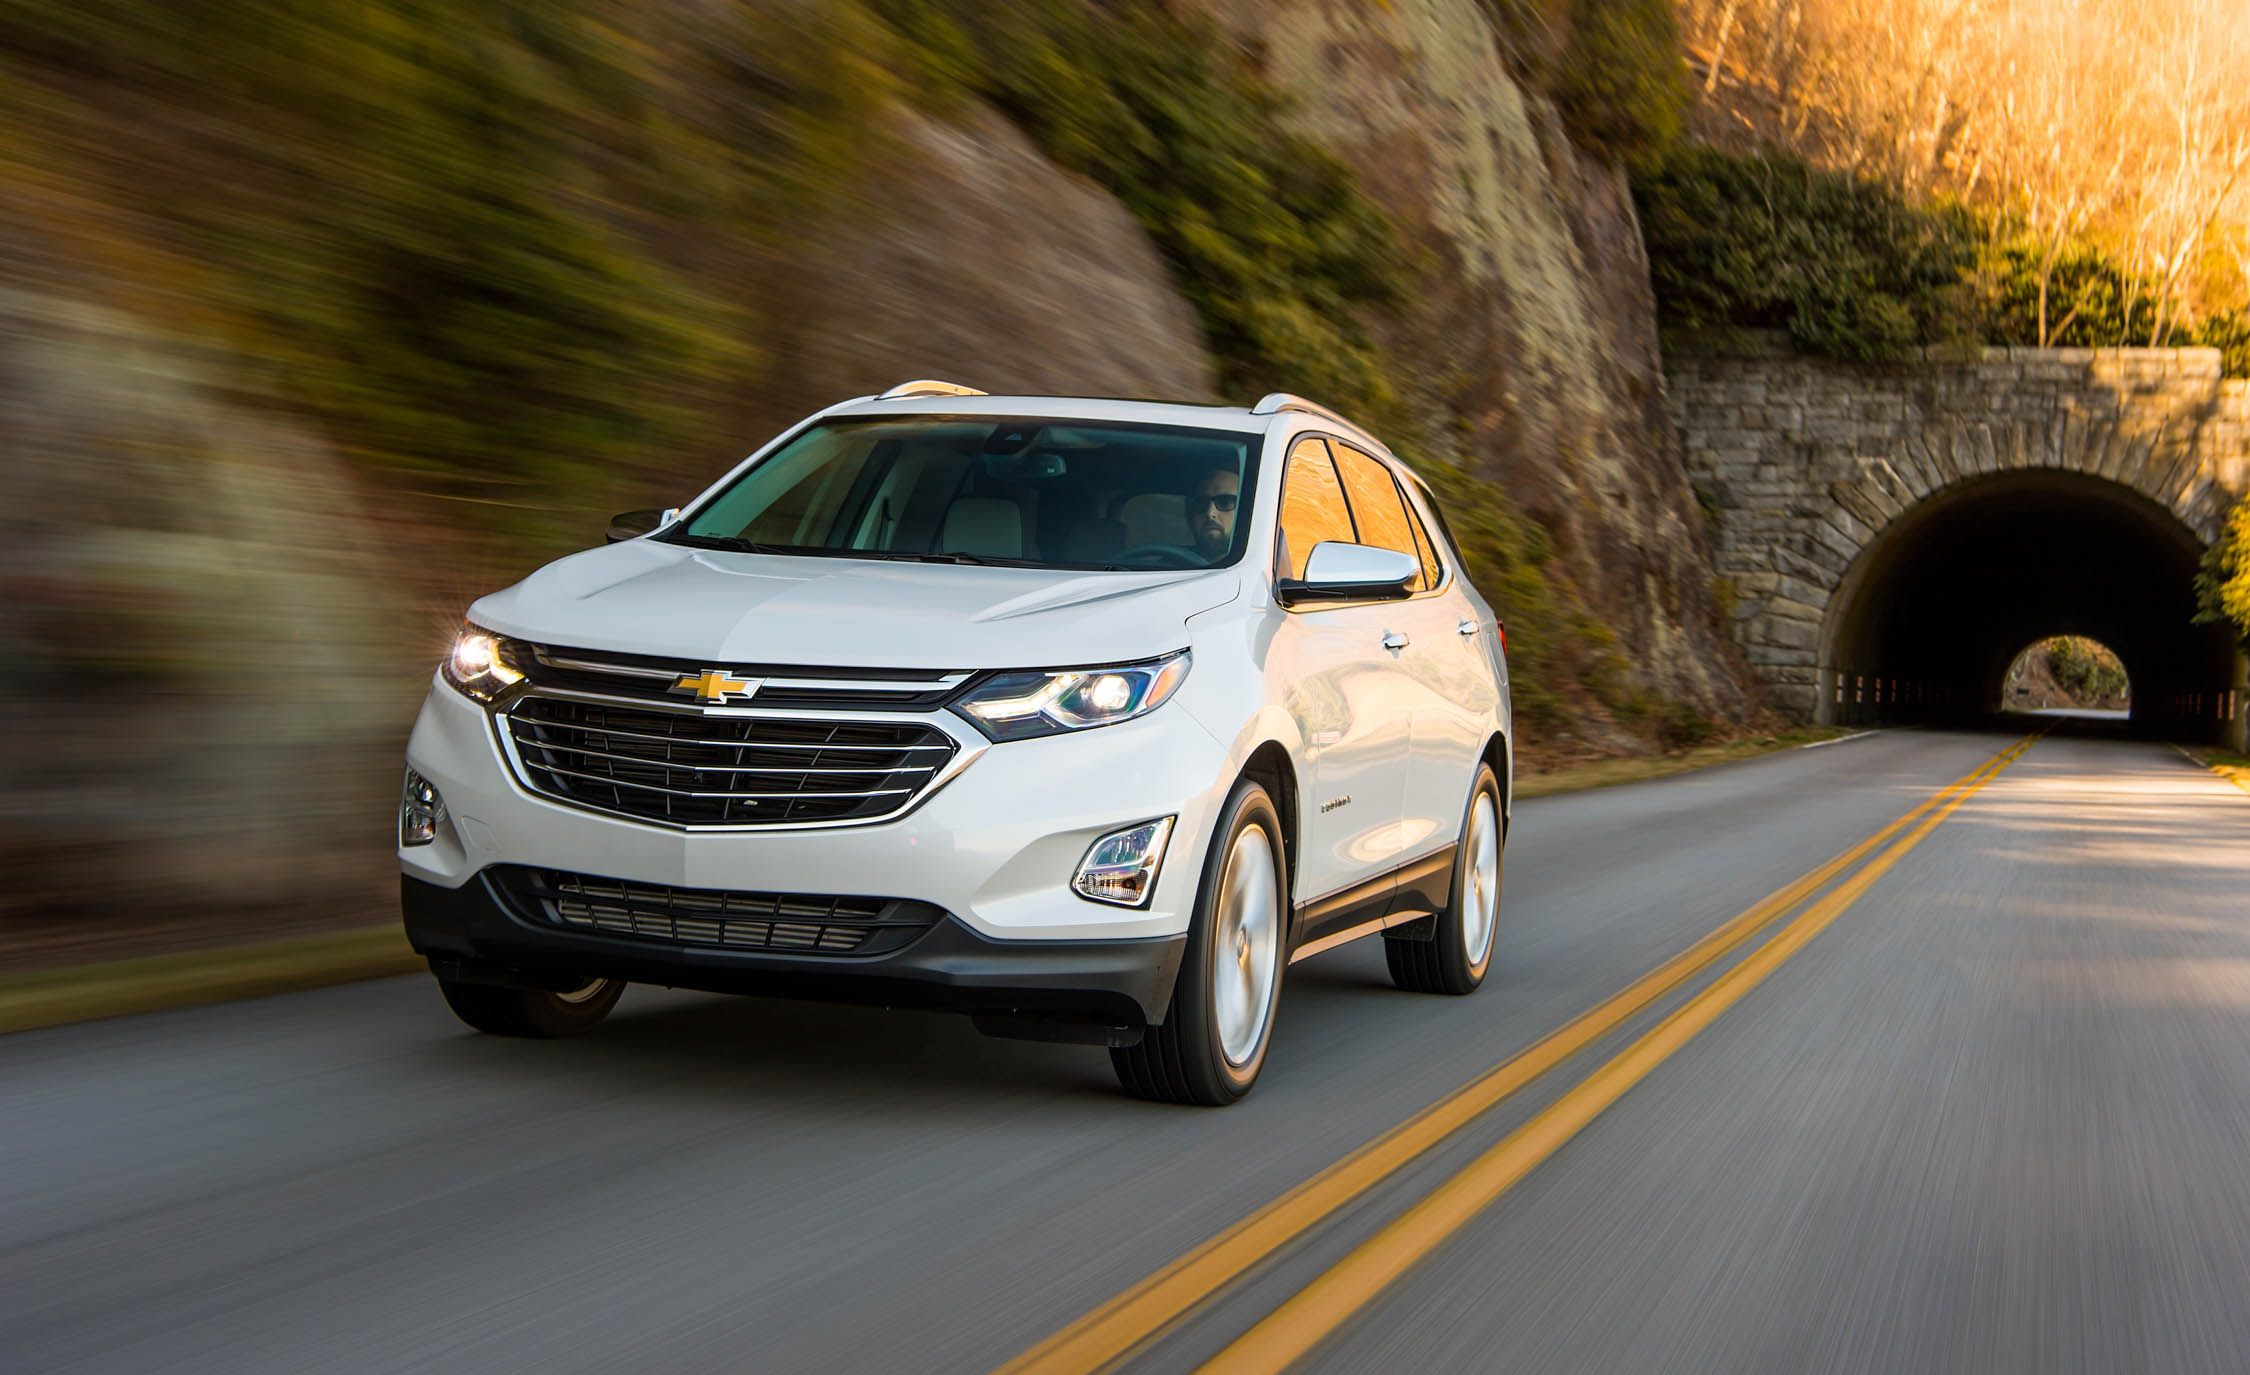 Chevrolet Equinox Prices, Reviews, and Photos   MotorTrend